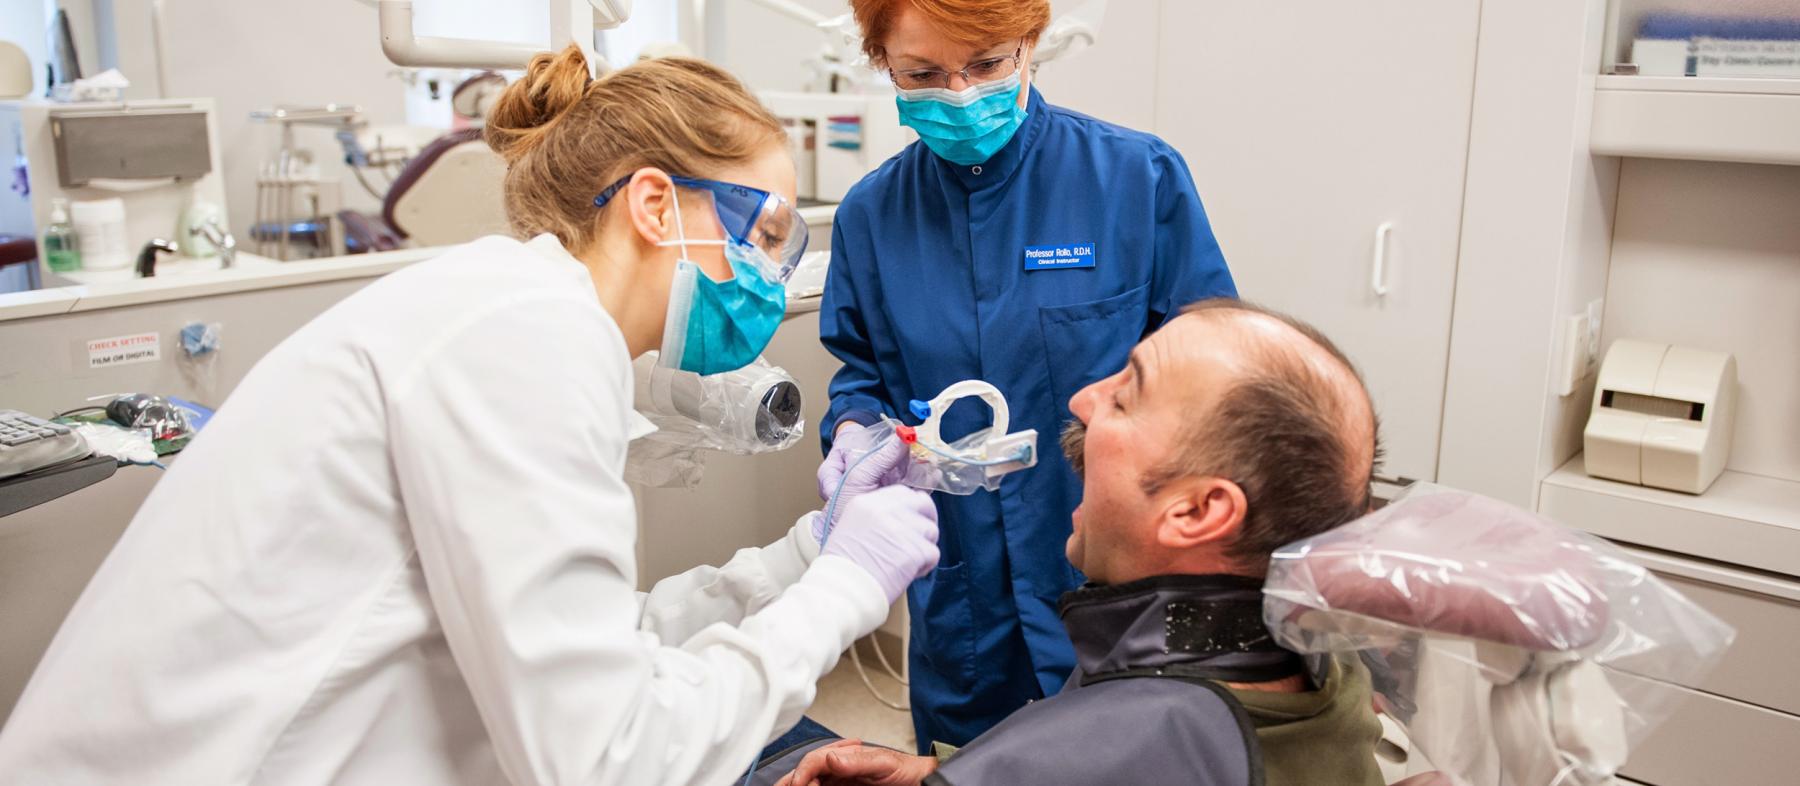 A student and instructor attend to a patient in the dental lab